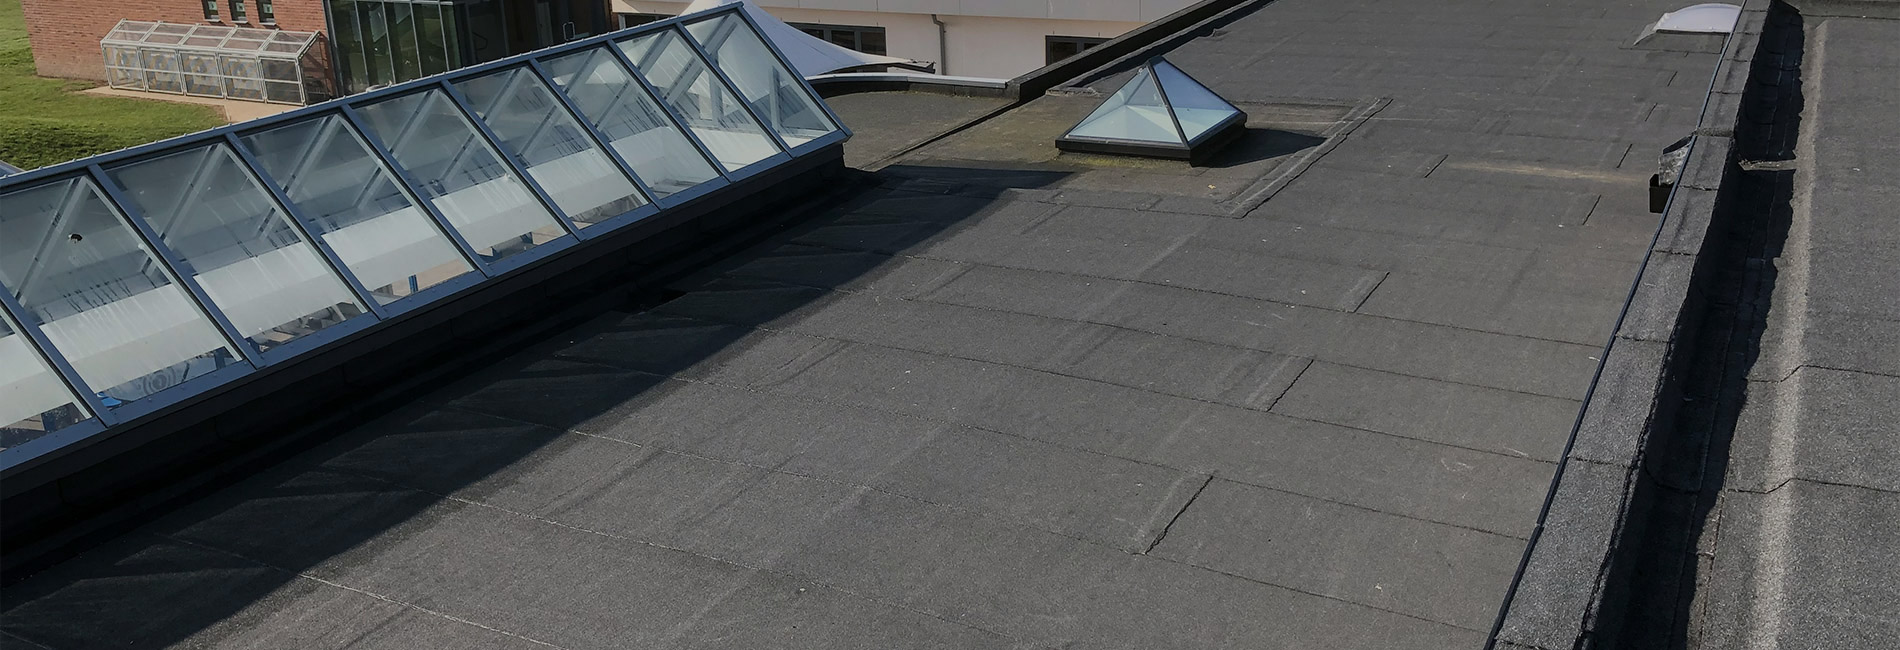 Specialists in all aspects of commercial and industrial flat roofing from a family company with over 50 years experience in the industry